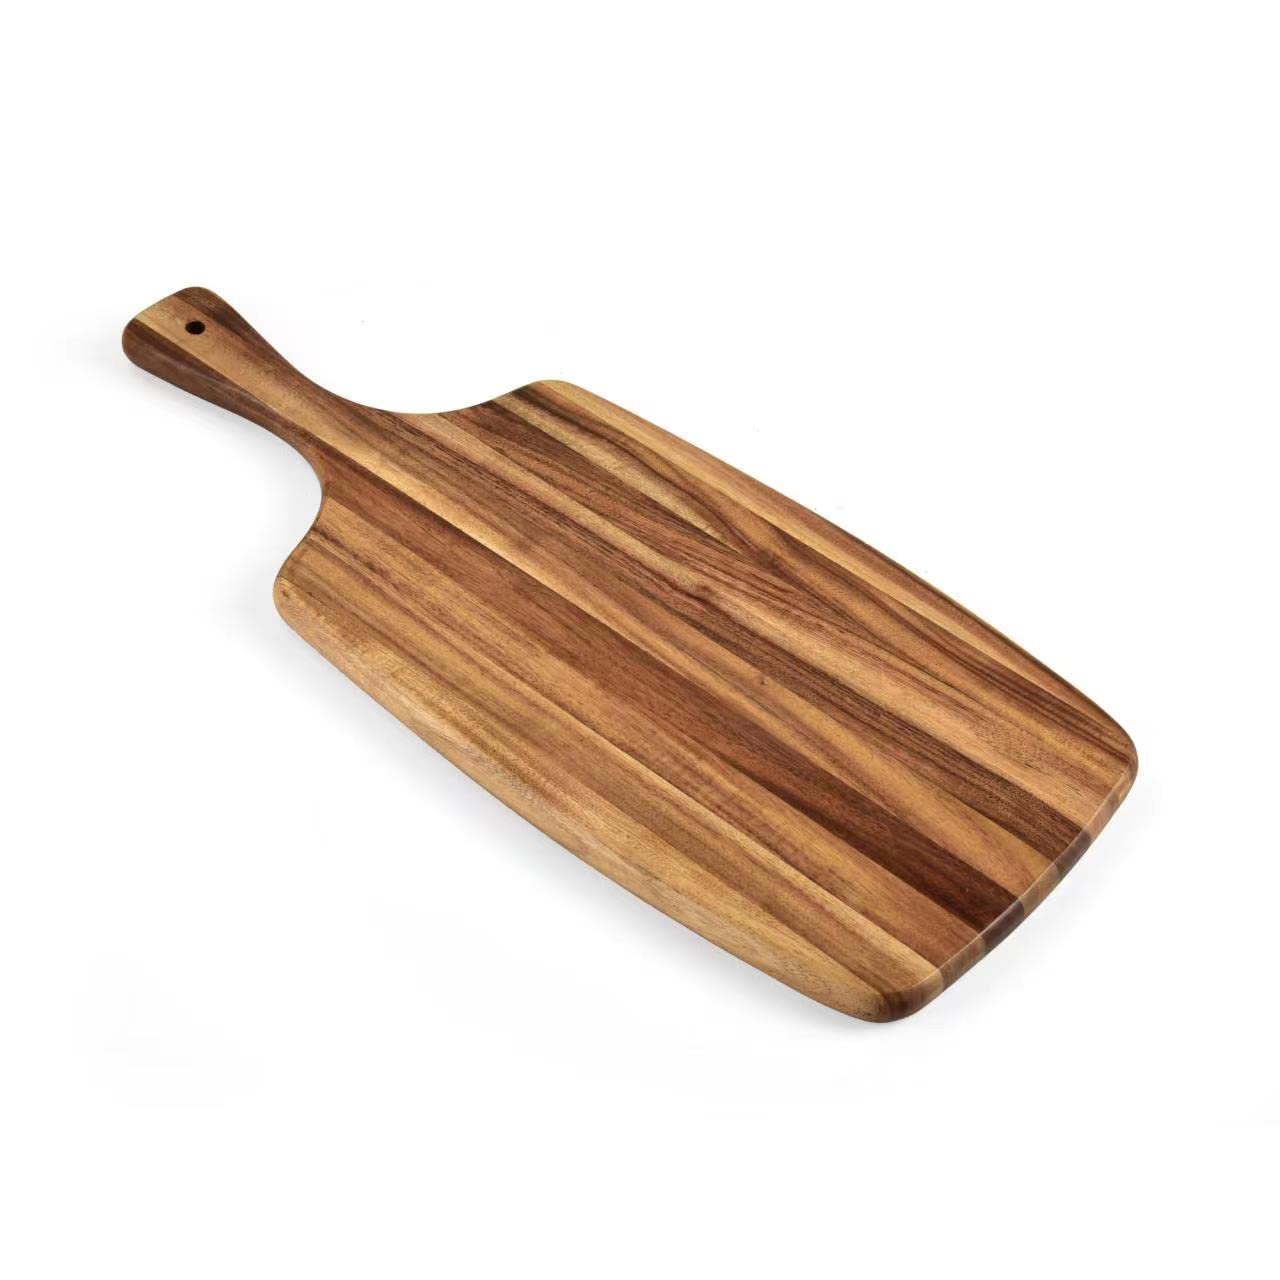 Shangrun 17 x 7 Inch Wooden Charcuterie Board for Bread, Meat, Fruits, Cheese and Serving